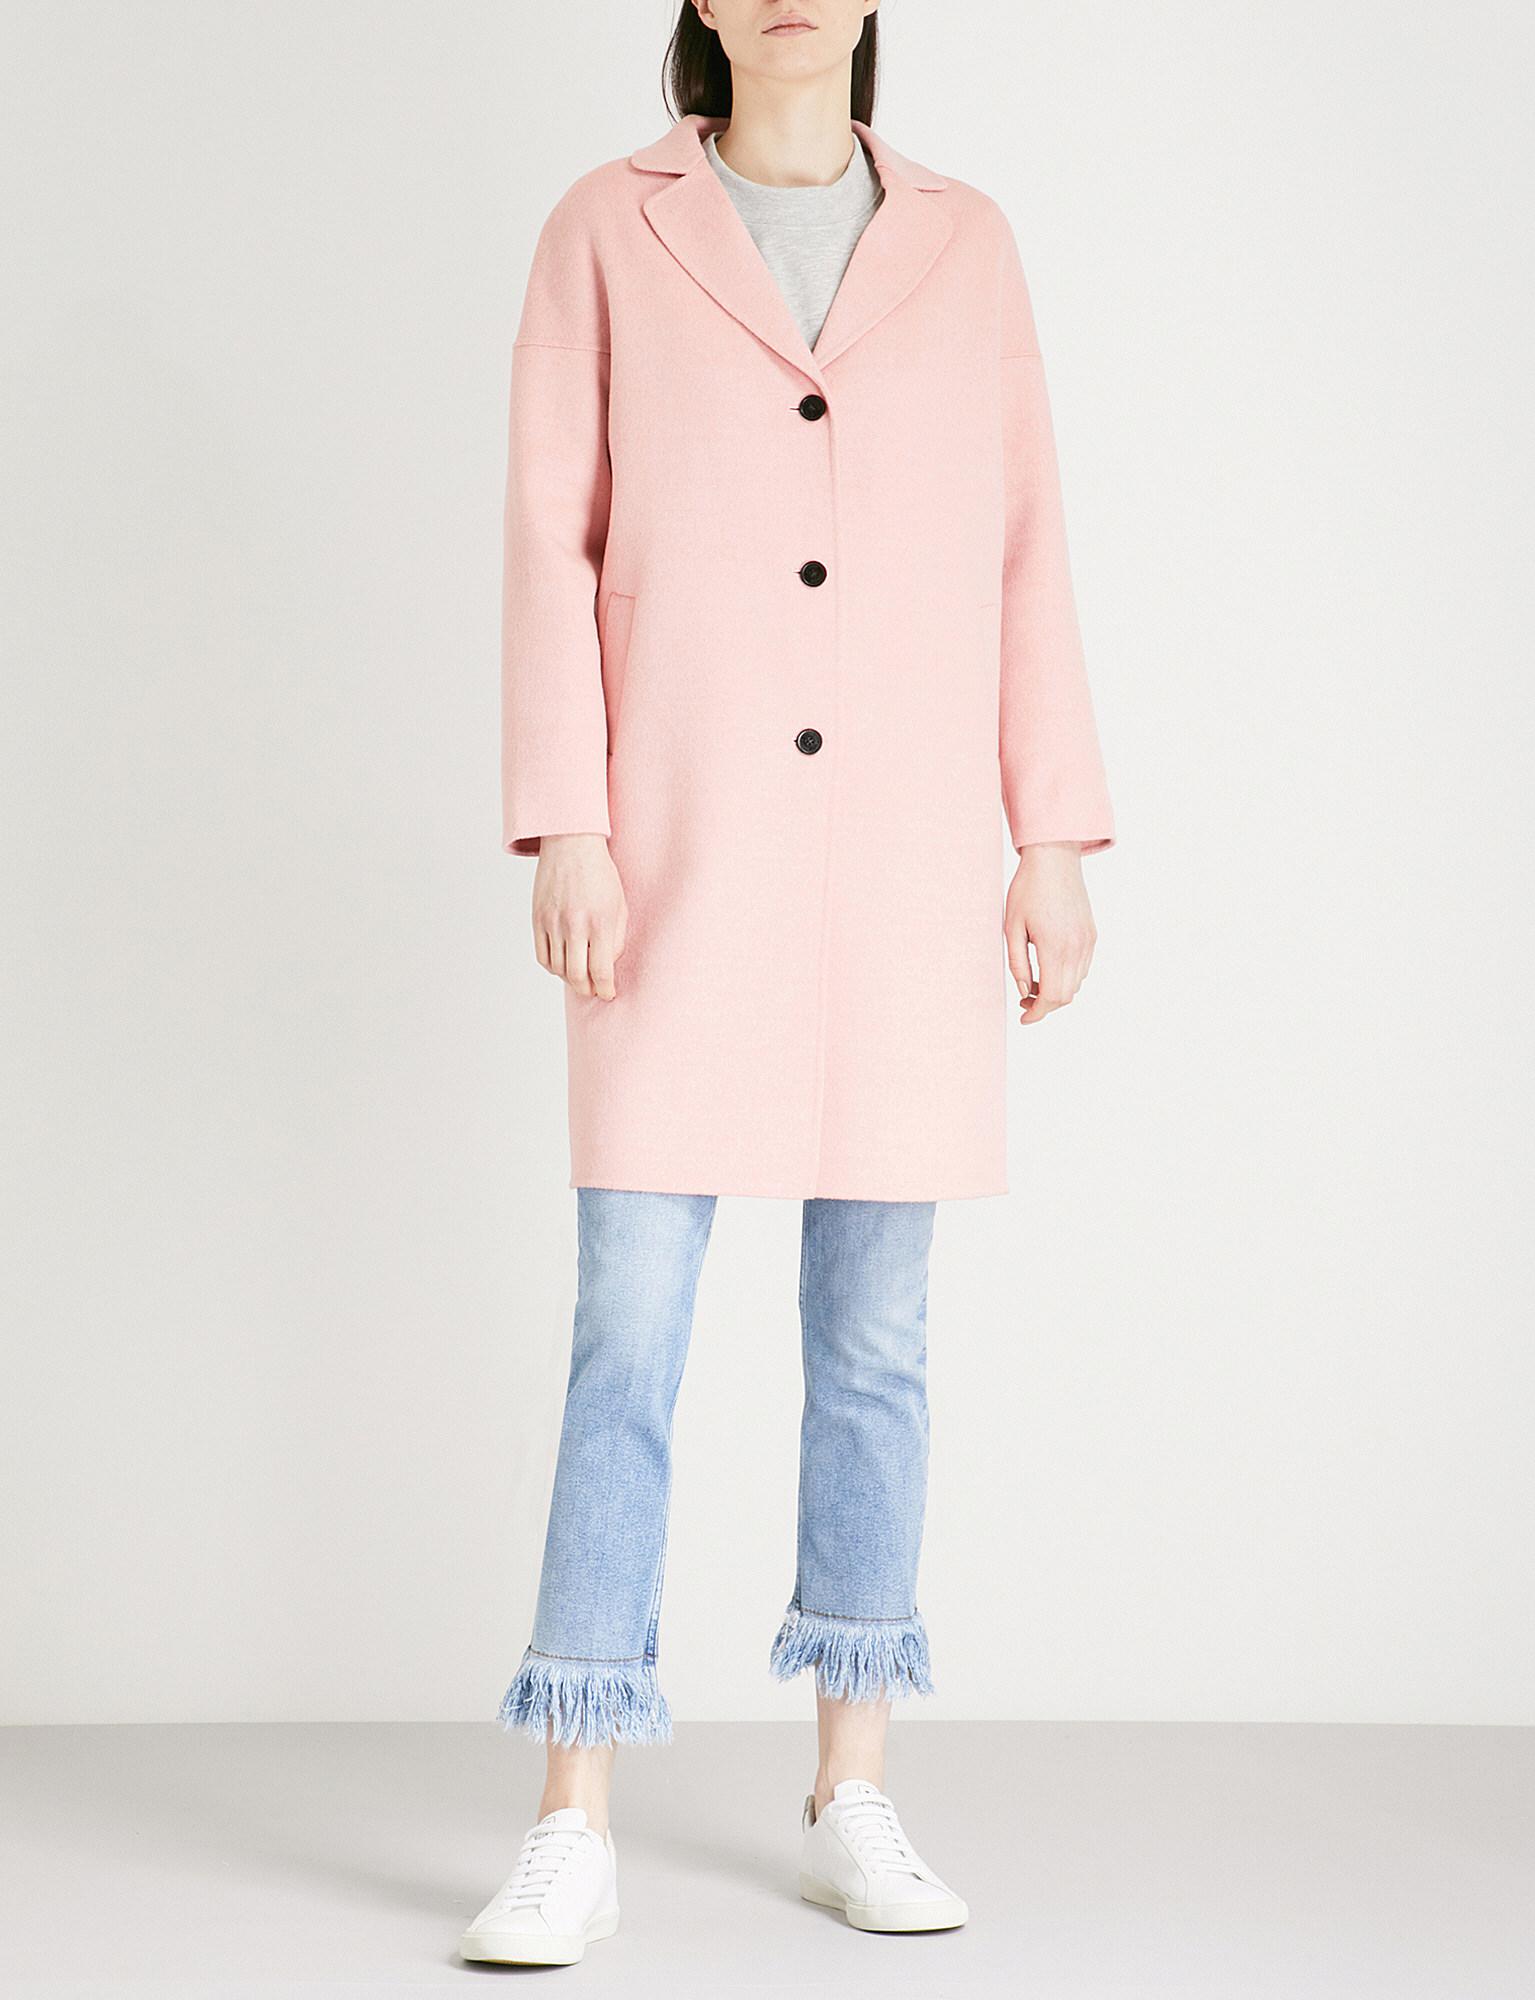 Claudie Pierlot Notched-lapel Wool And Cashmere-blend Coat in Pink - Lyst